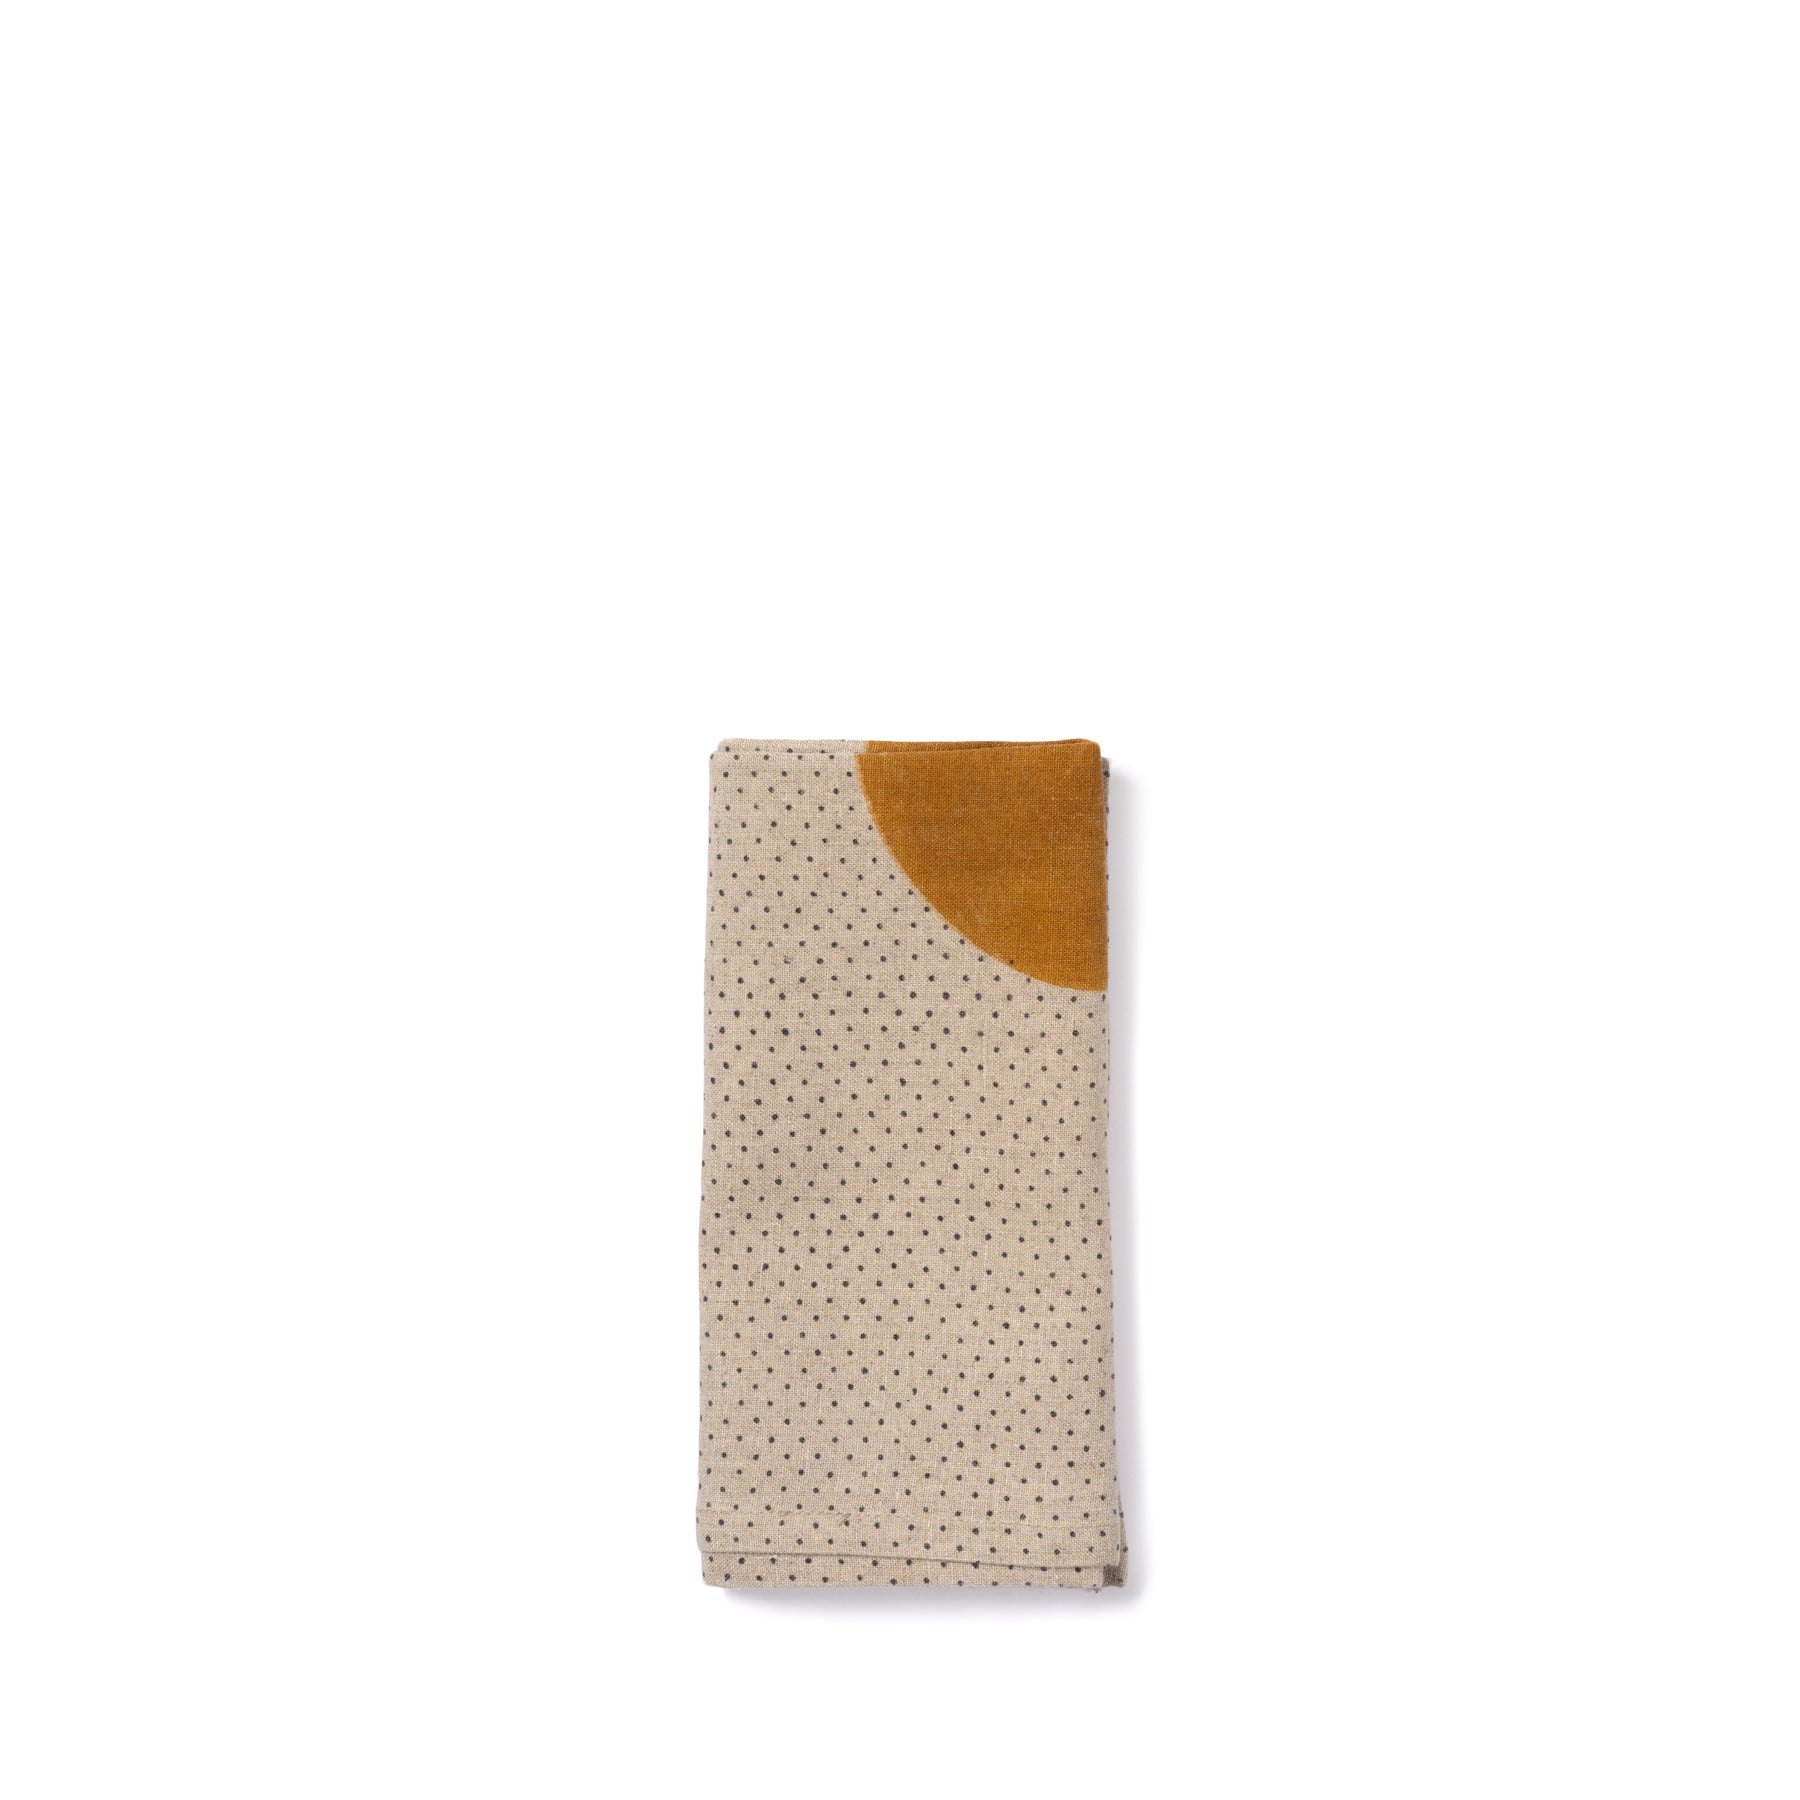 Moonphase Napkin in Ochre with Black Dot Zoom Image 1